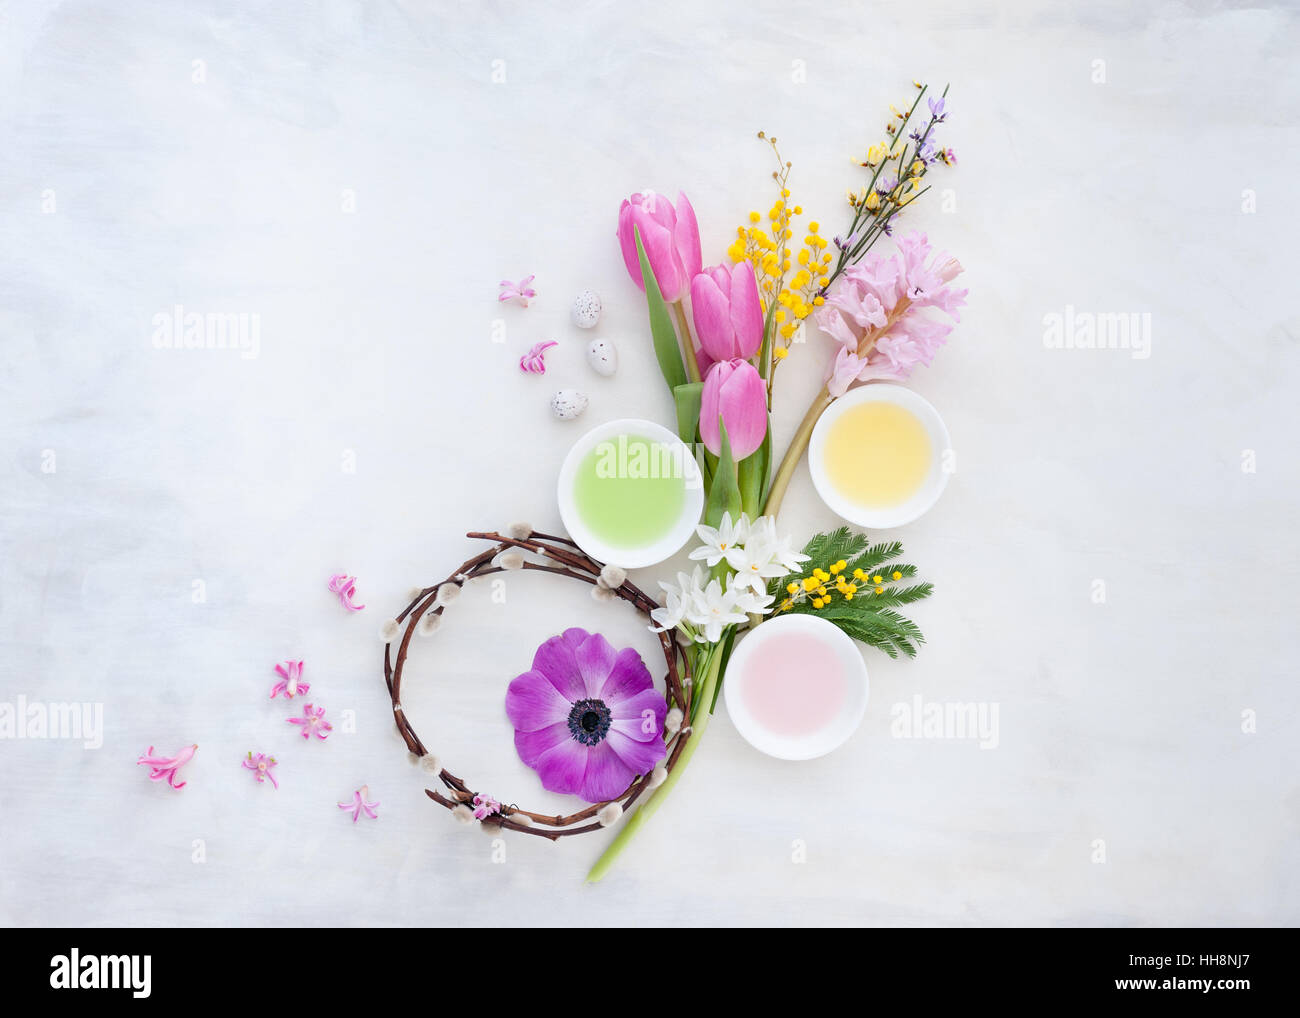 pussy willow wreath with colourful spring flowers laid out on white and gray painted backdrop Stock Photo